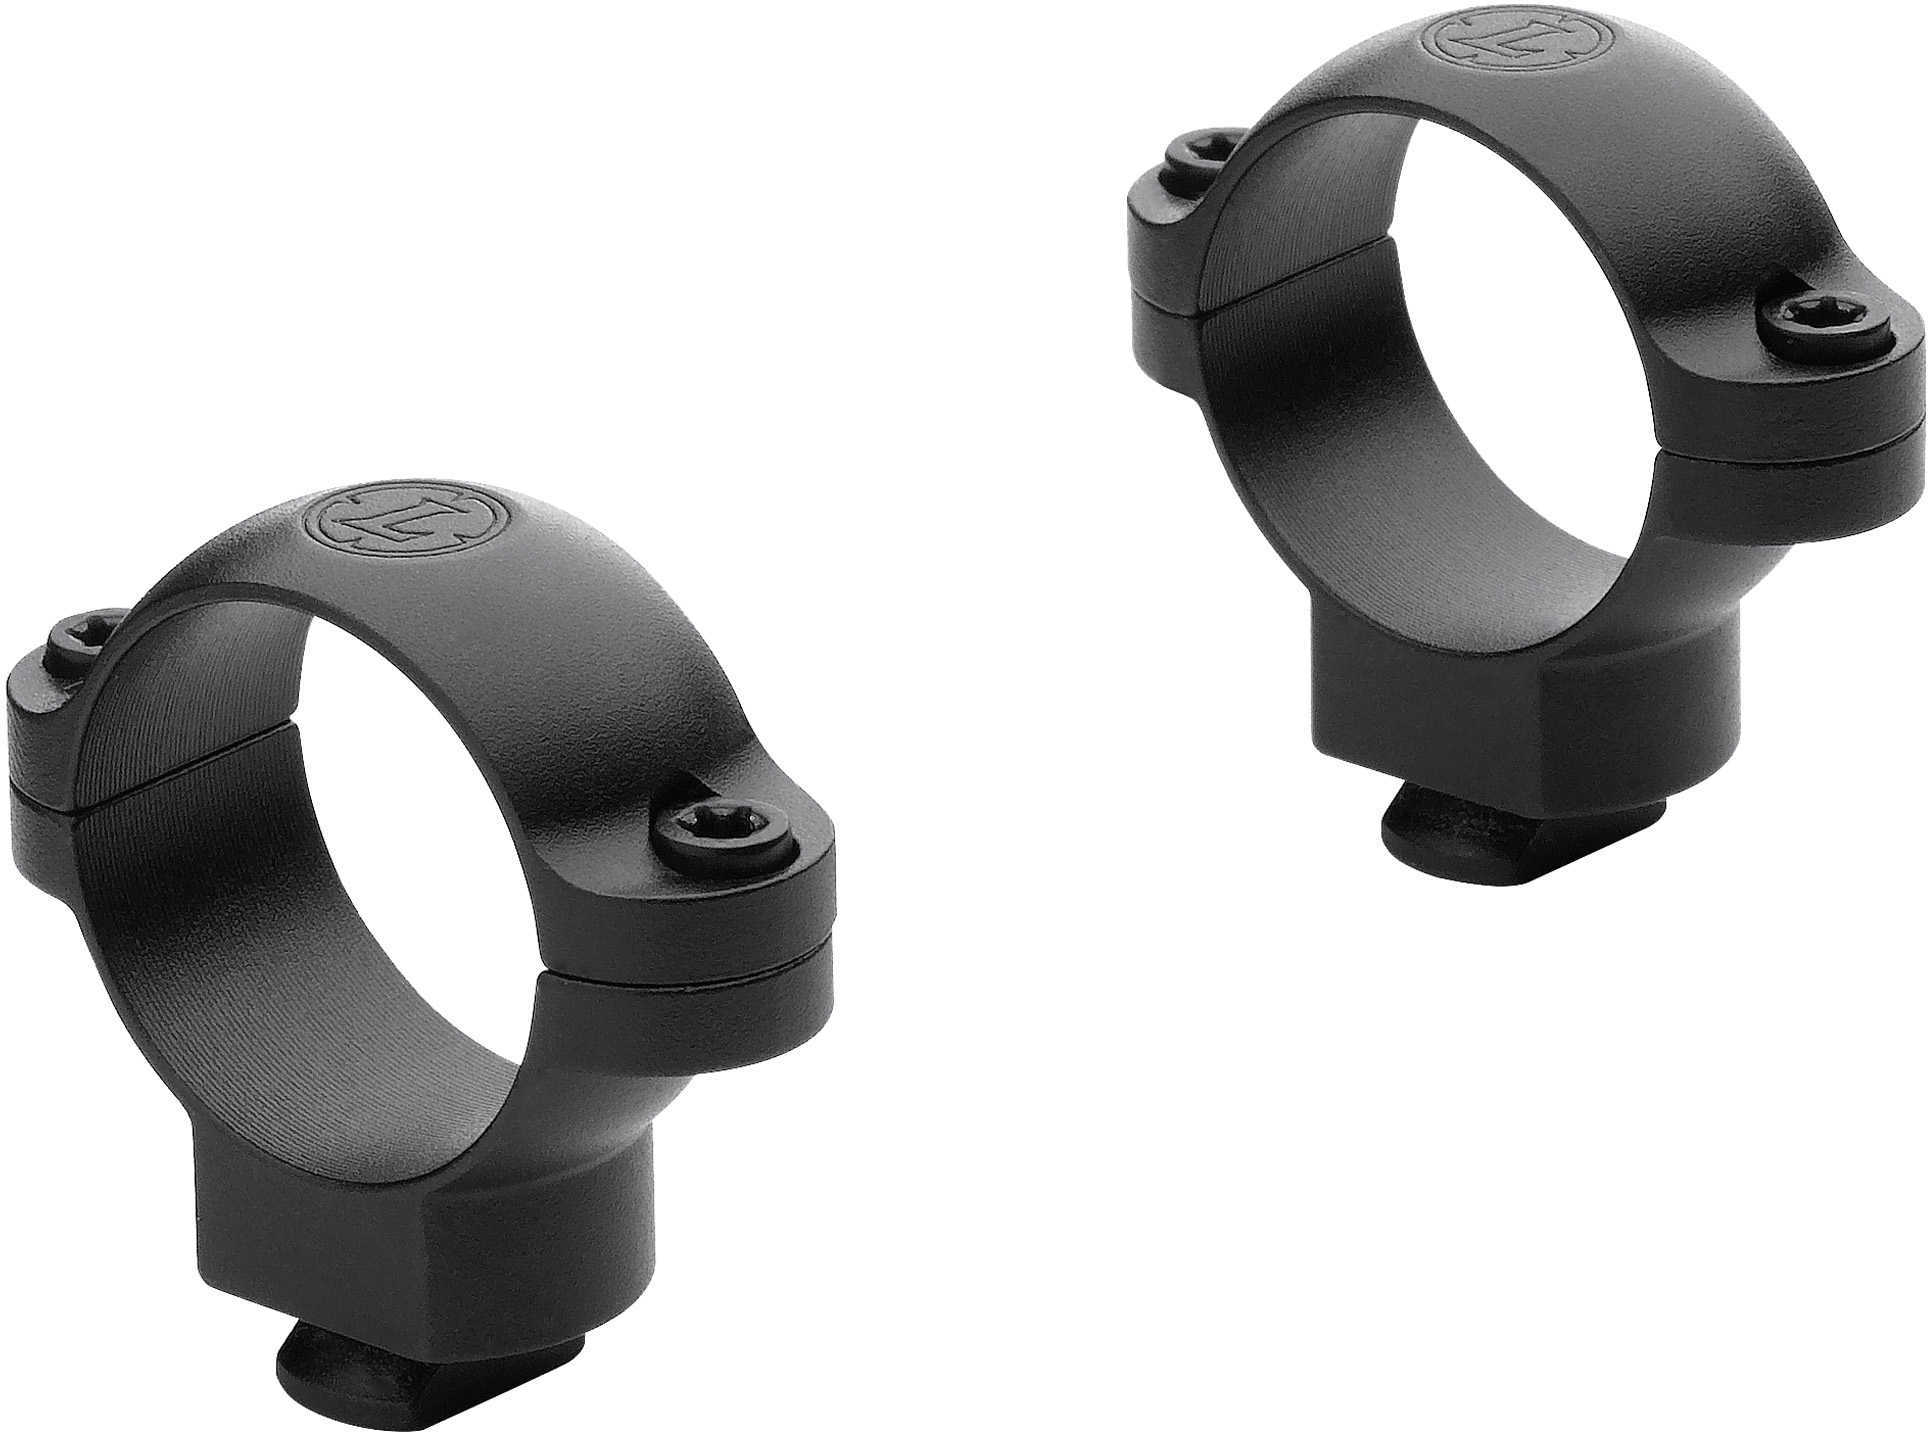 Leupold Dual Dovetail 1" Rings High Matte Finish Machined Steel - Classic Low-Profile Mount Connections at B